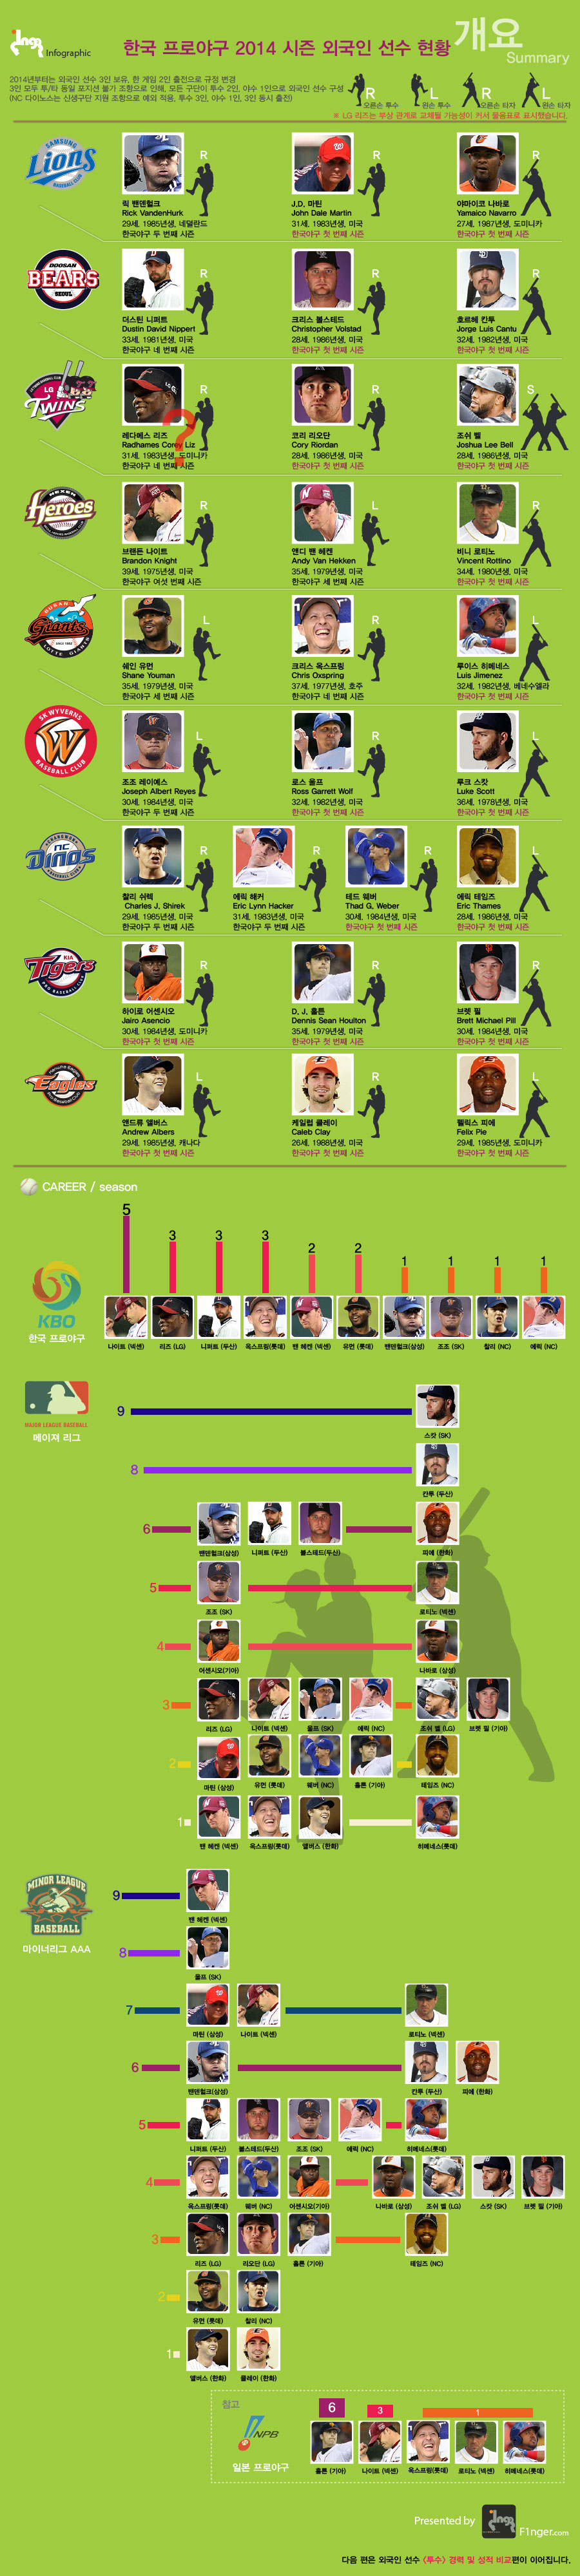 2014_fp_list_infographic_by-F1nger